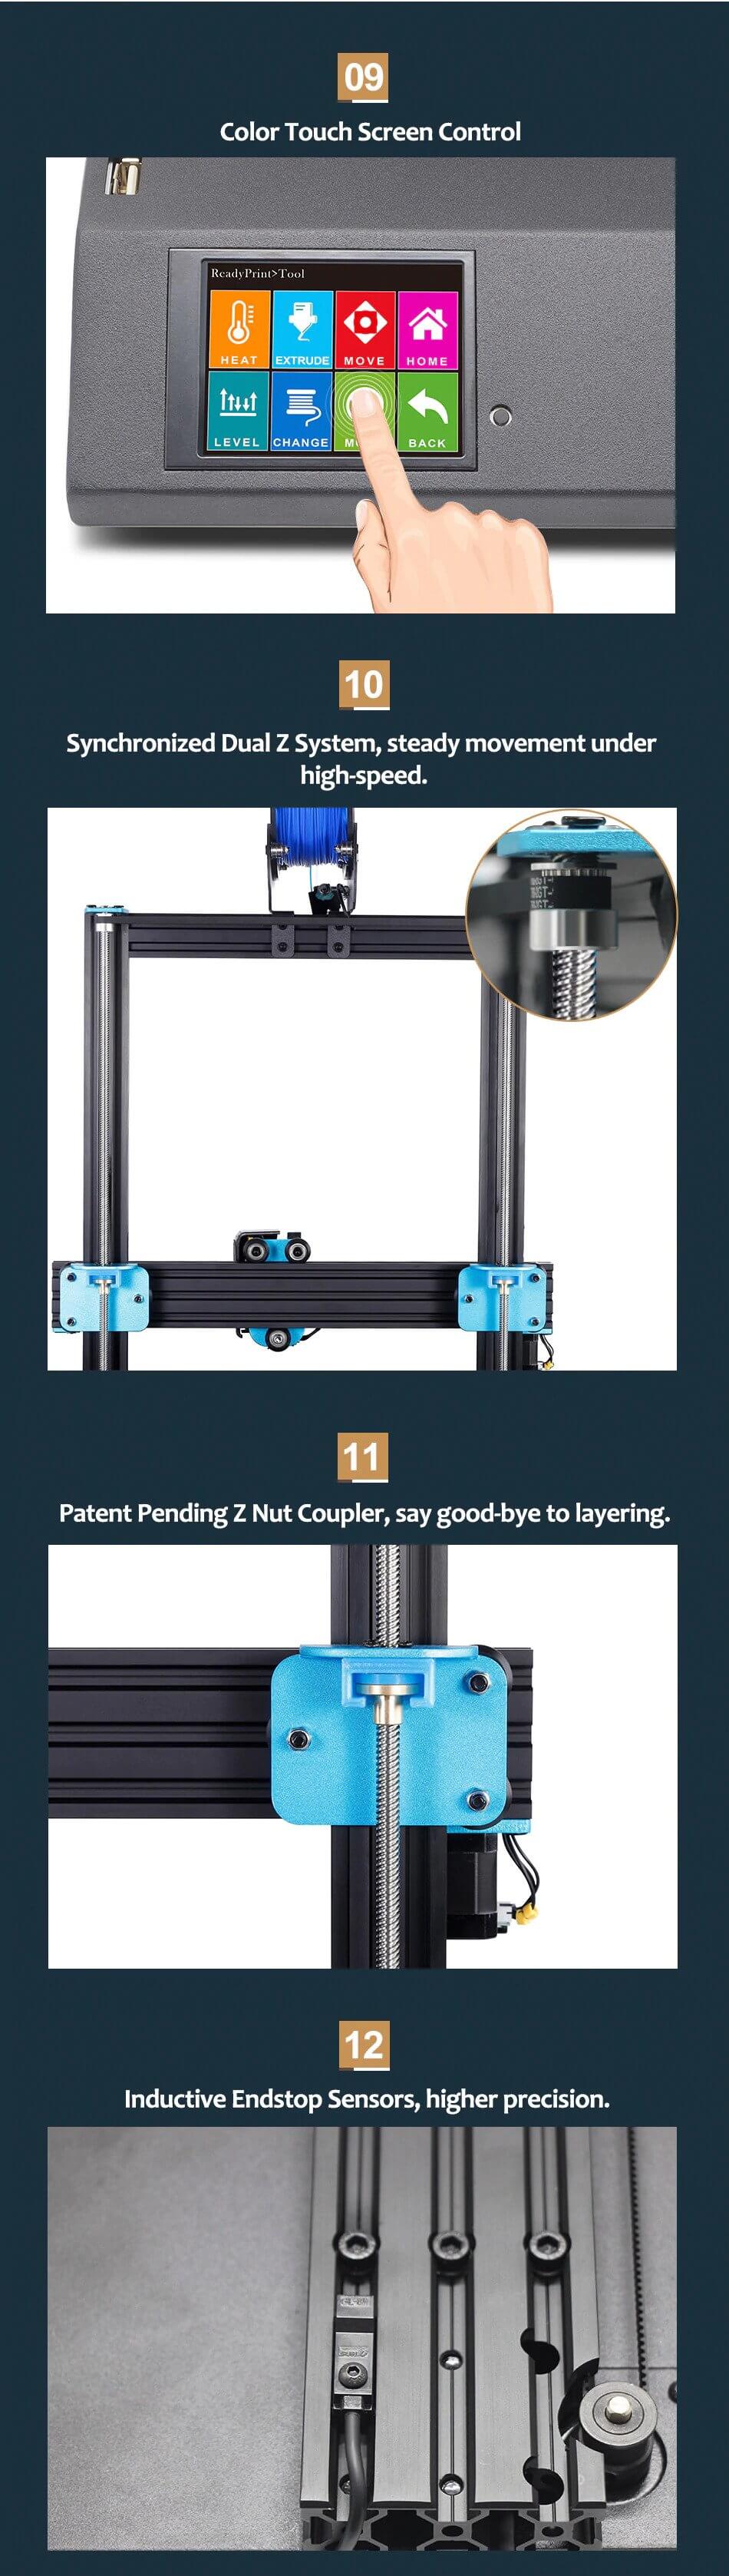 Artillery® Sidewinder X1 High Precision 3D Printer (300*300*400mm Large Print Size) Resume Print/Filament Run-out Detection With Dual Z axis & TFT LCD